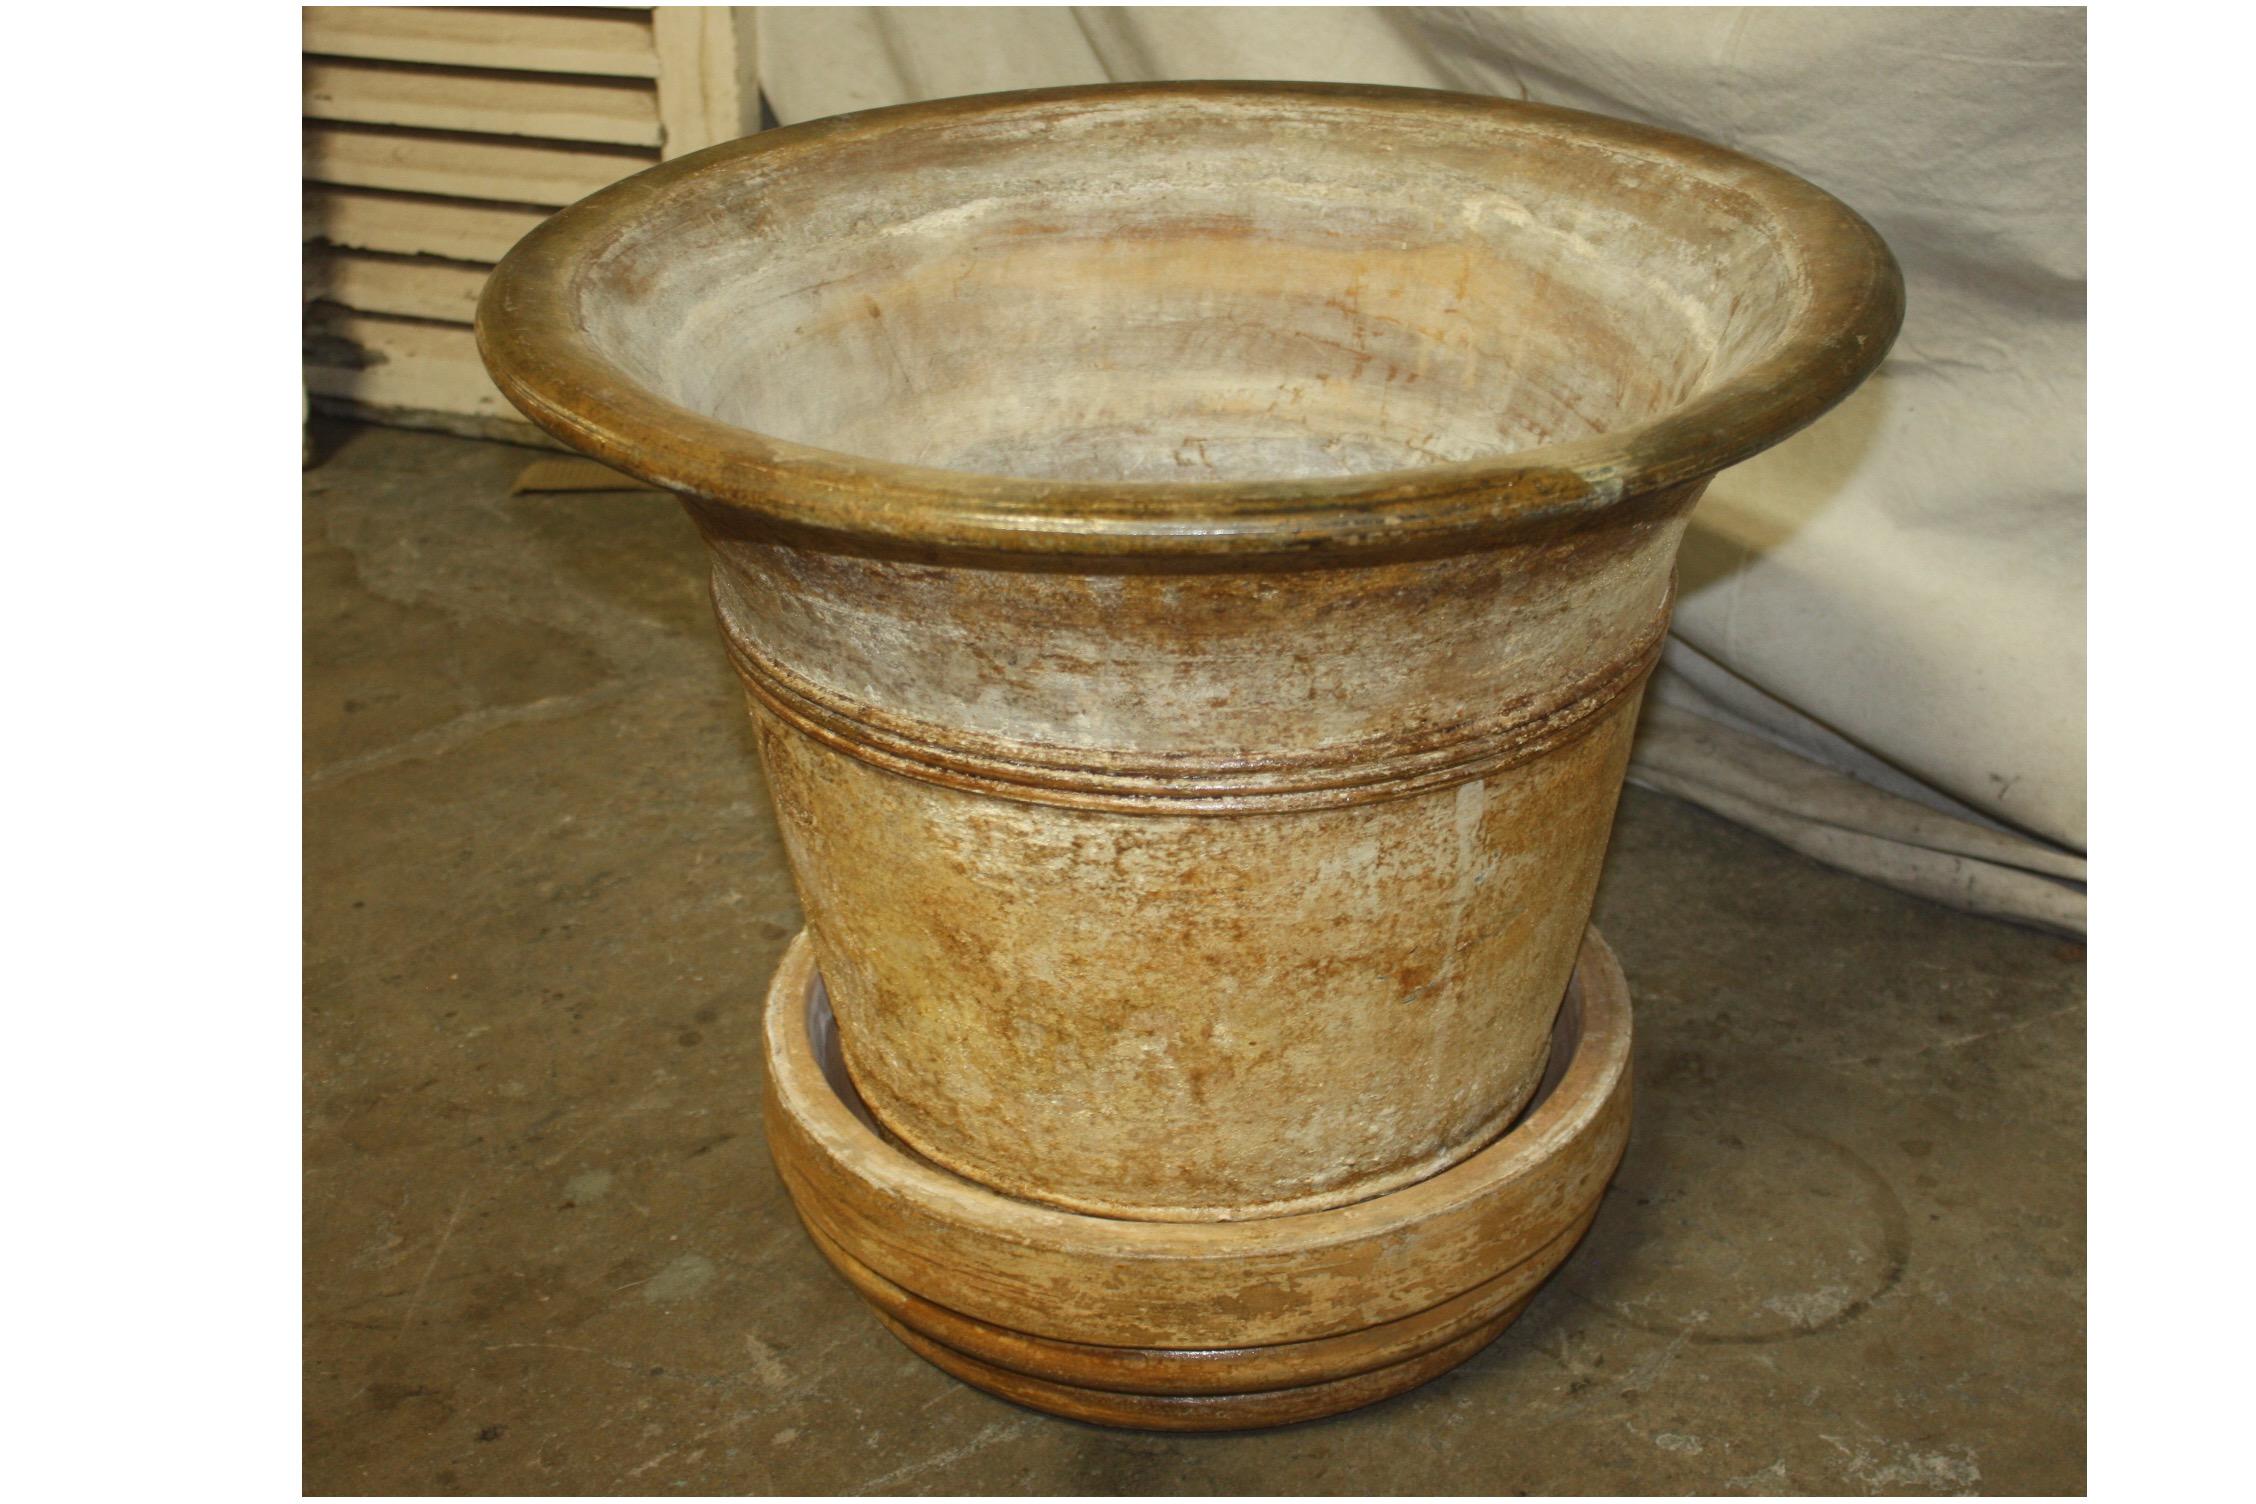 Early 20th century French terracotta planter.